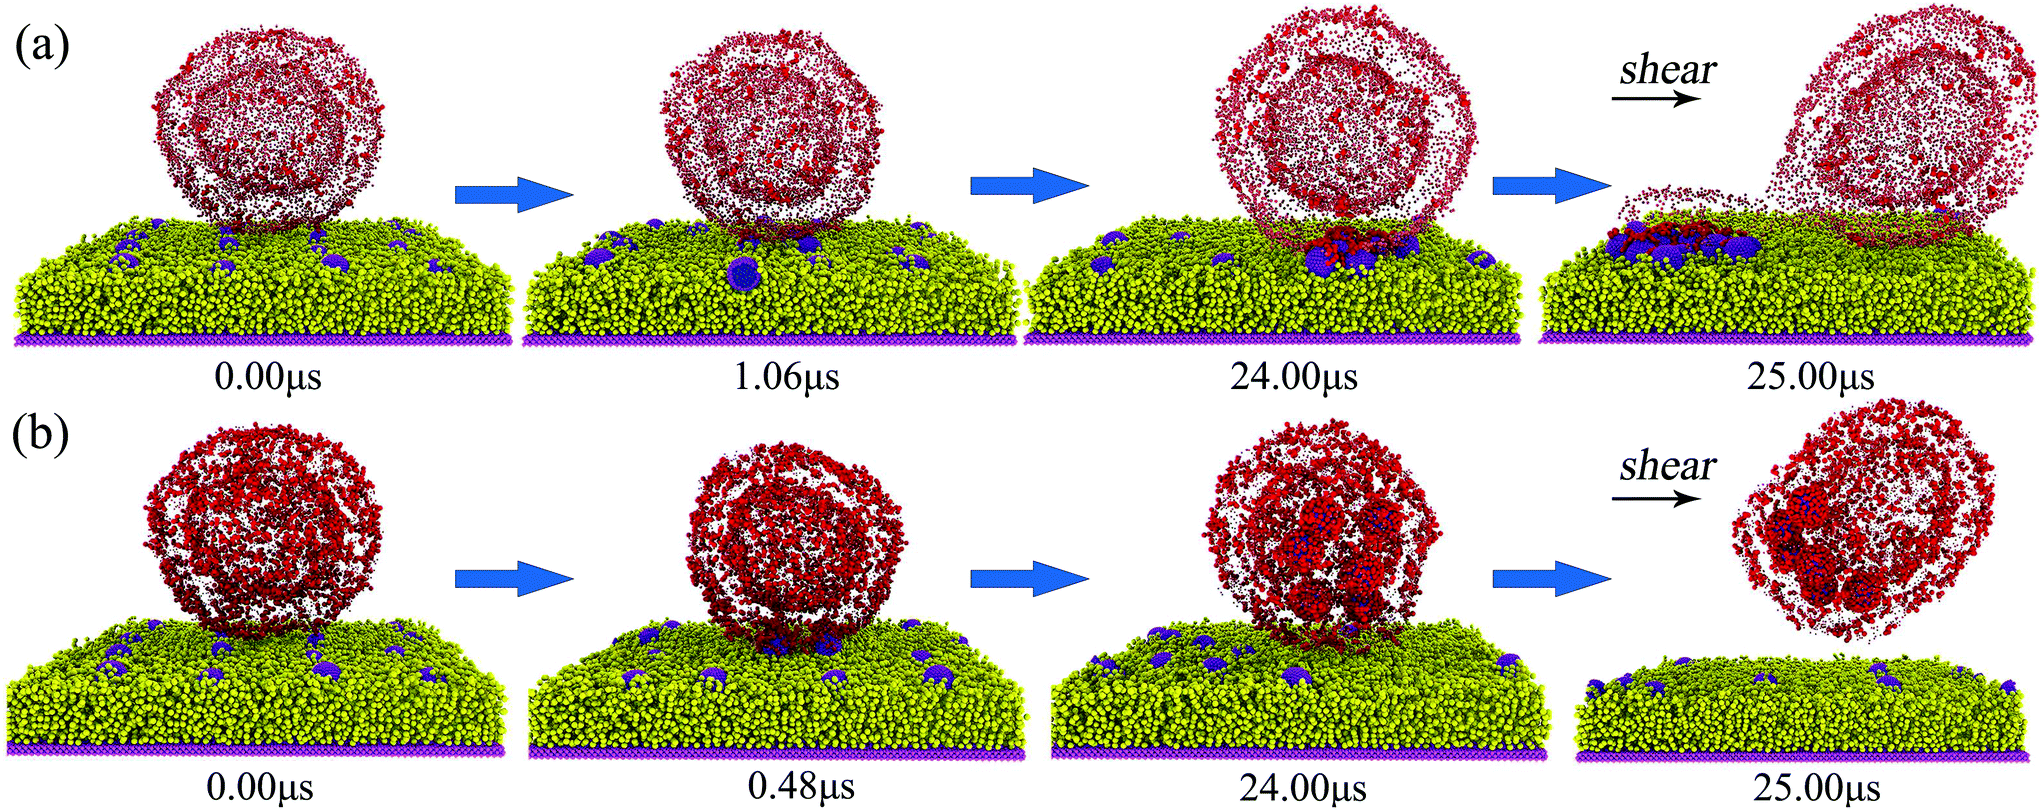 Designing A Nanoparticle Containing Polymeric Substrate For Detecting Cancer Cells By Computer Simulations Nanoscale Rsc Publishing Doi 10 1039 C8nrk